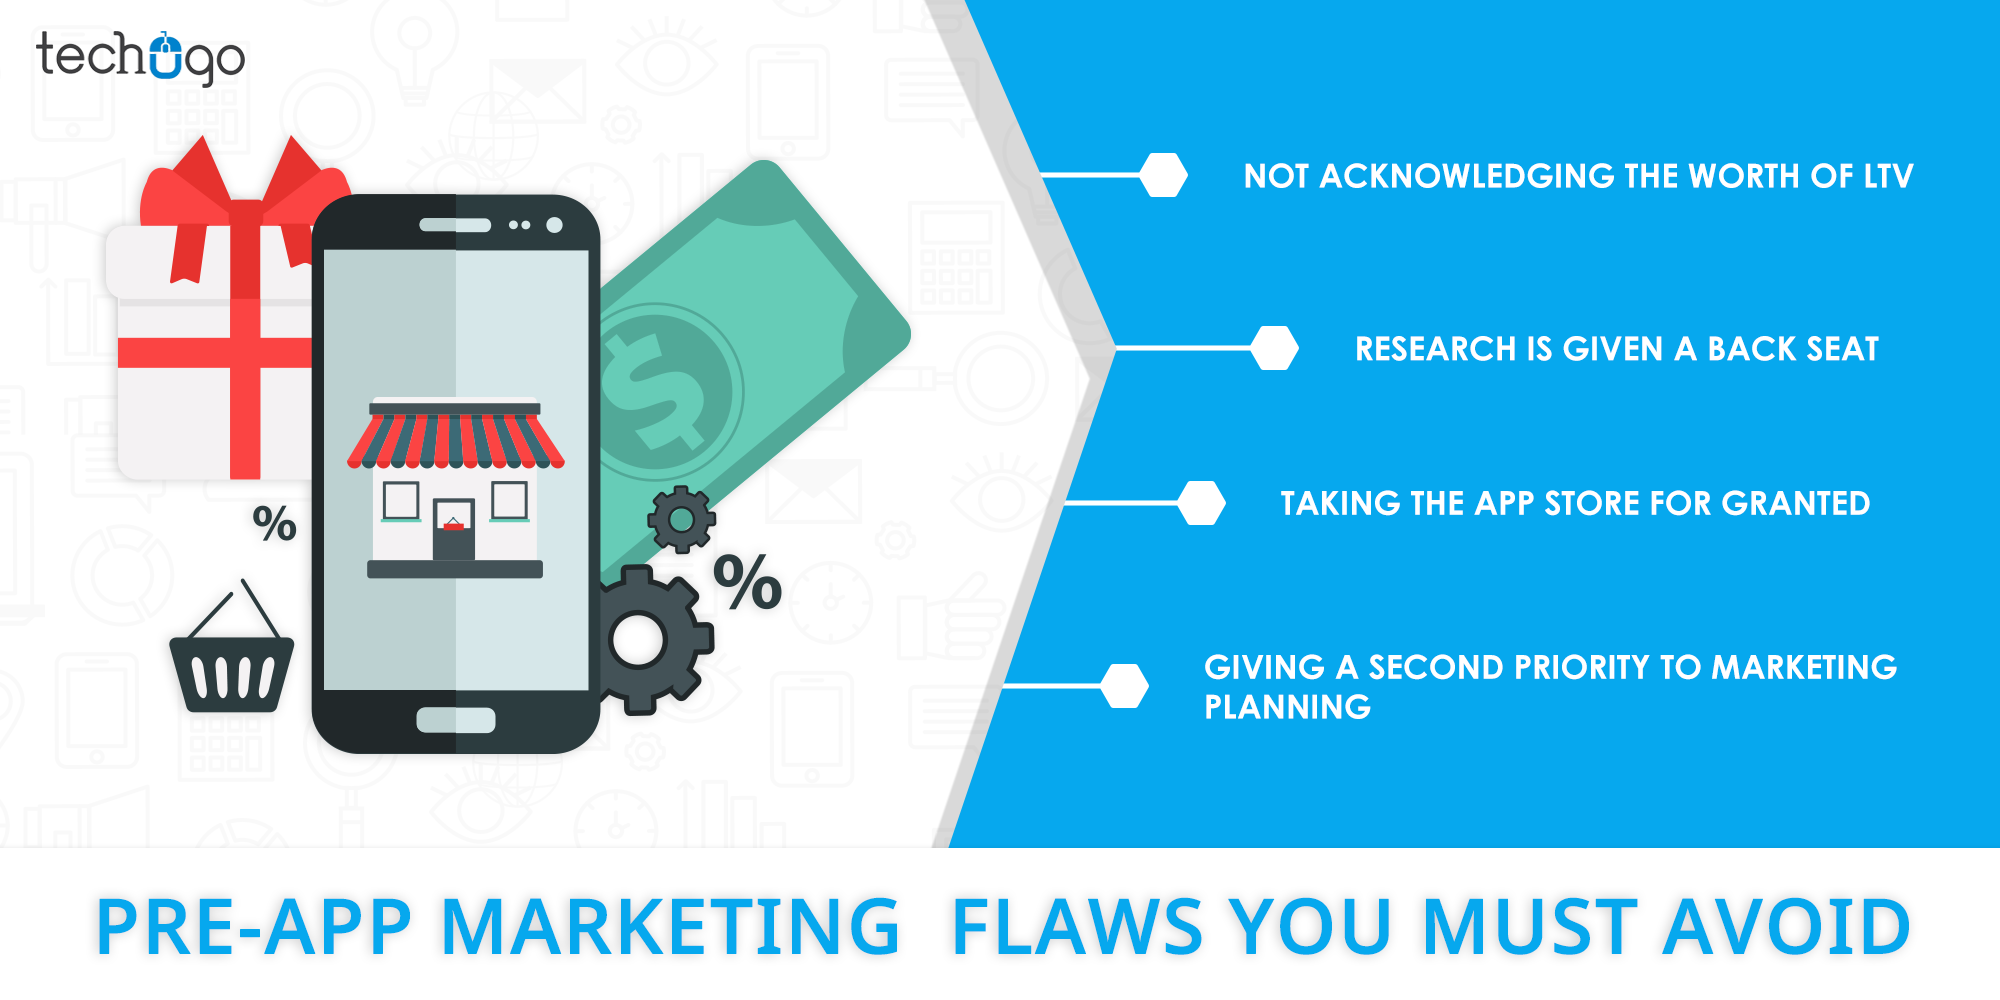 Pre-App Marketing Flaws You Must Avoid